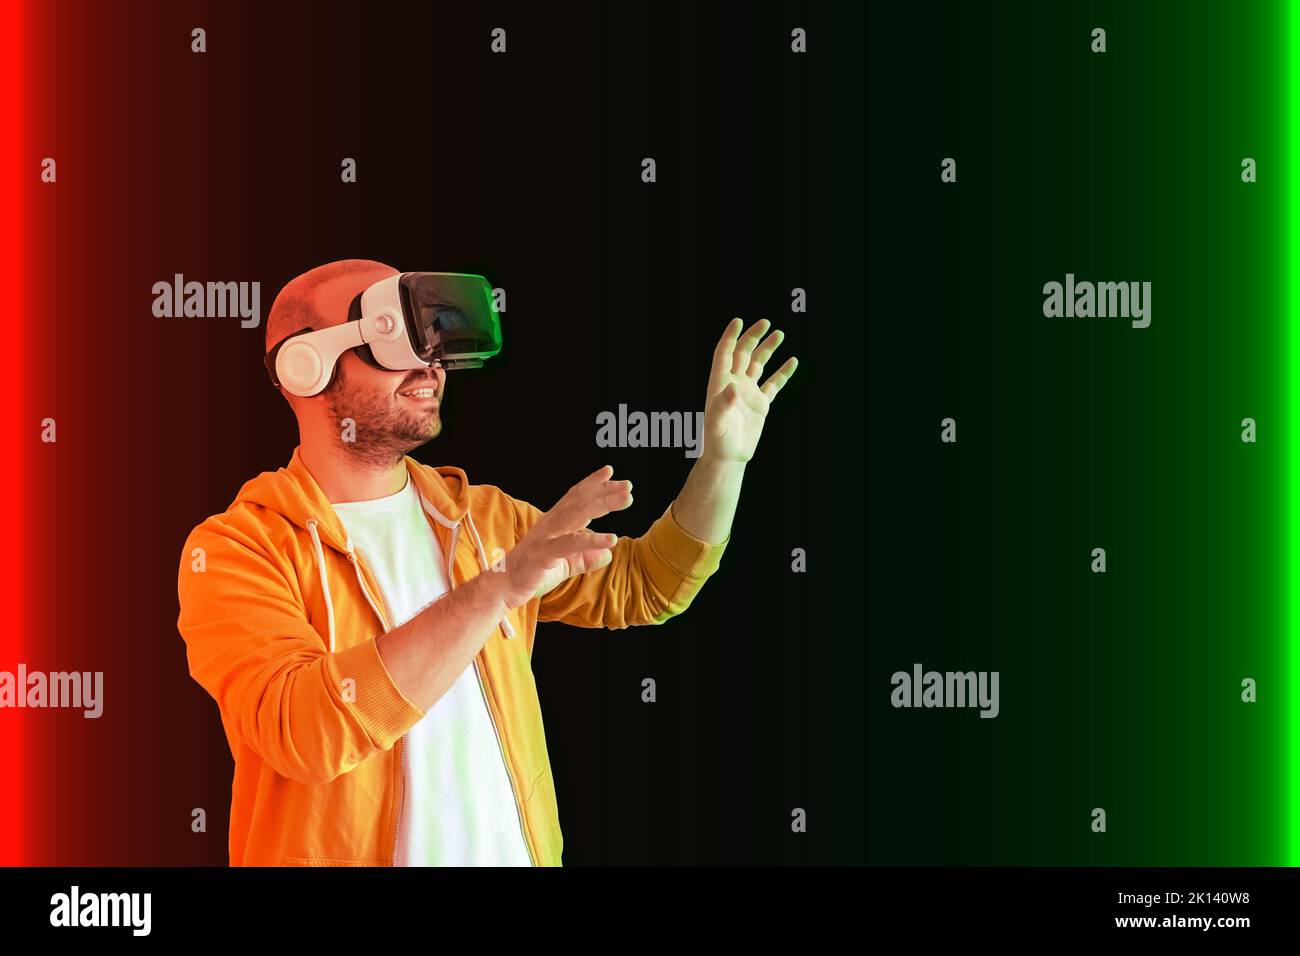 Enter the virtual world with vr glasses. interesting tech graphics. Stock Photo